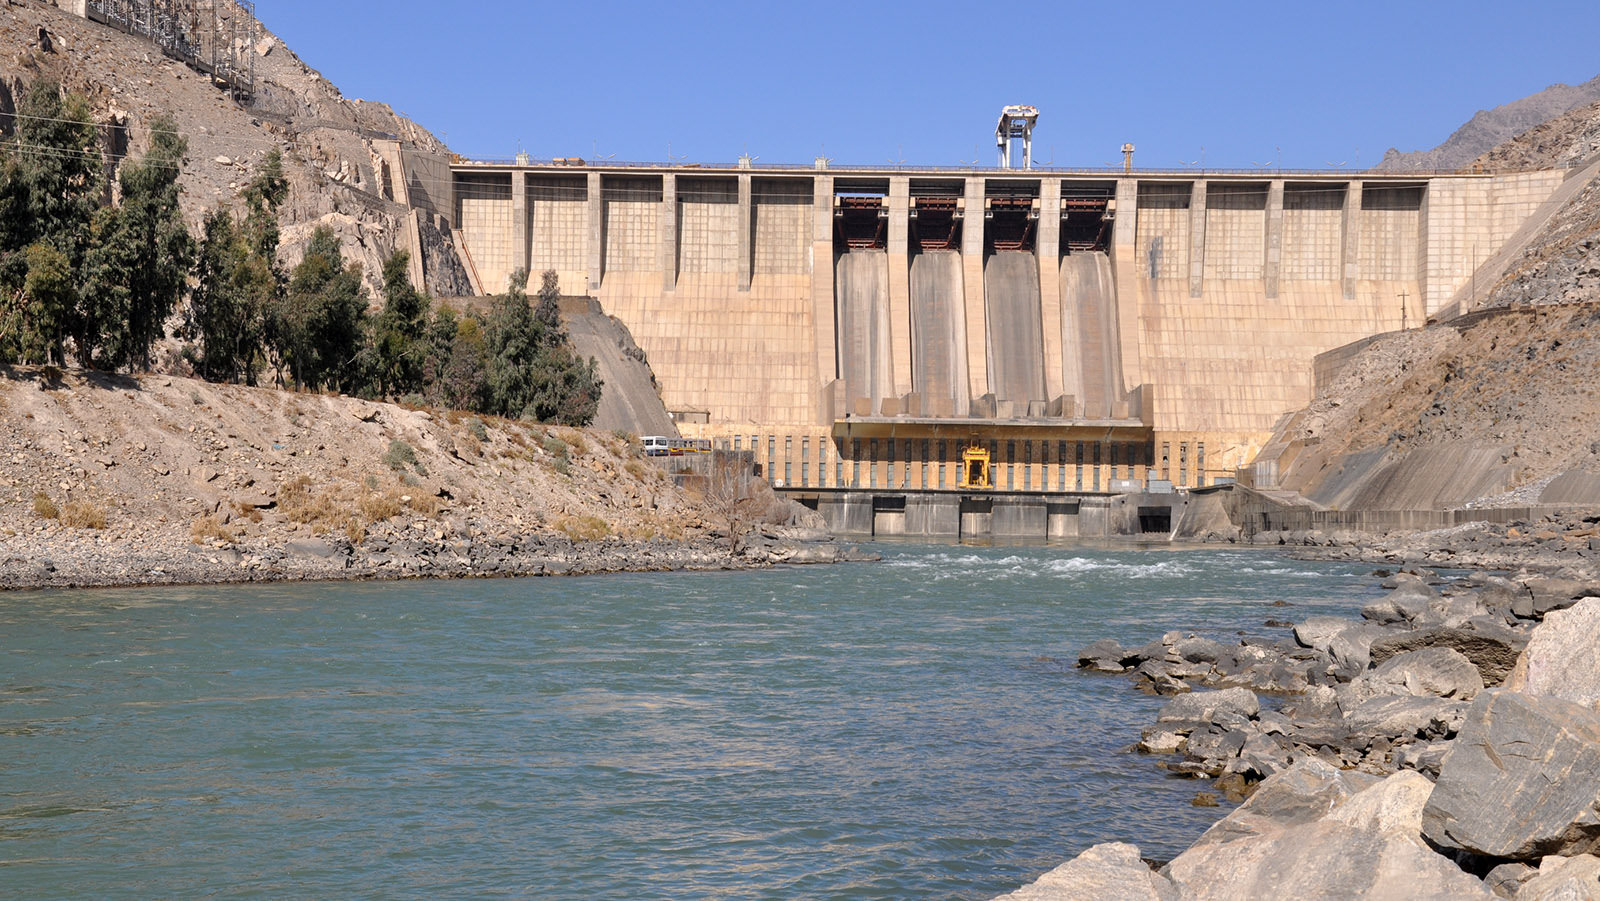 The Naghlu hydropower dam supplies electricity to Kabul [image by Qaseem Naimi / ICIMOD]